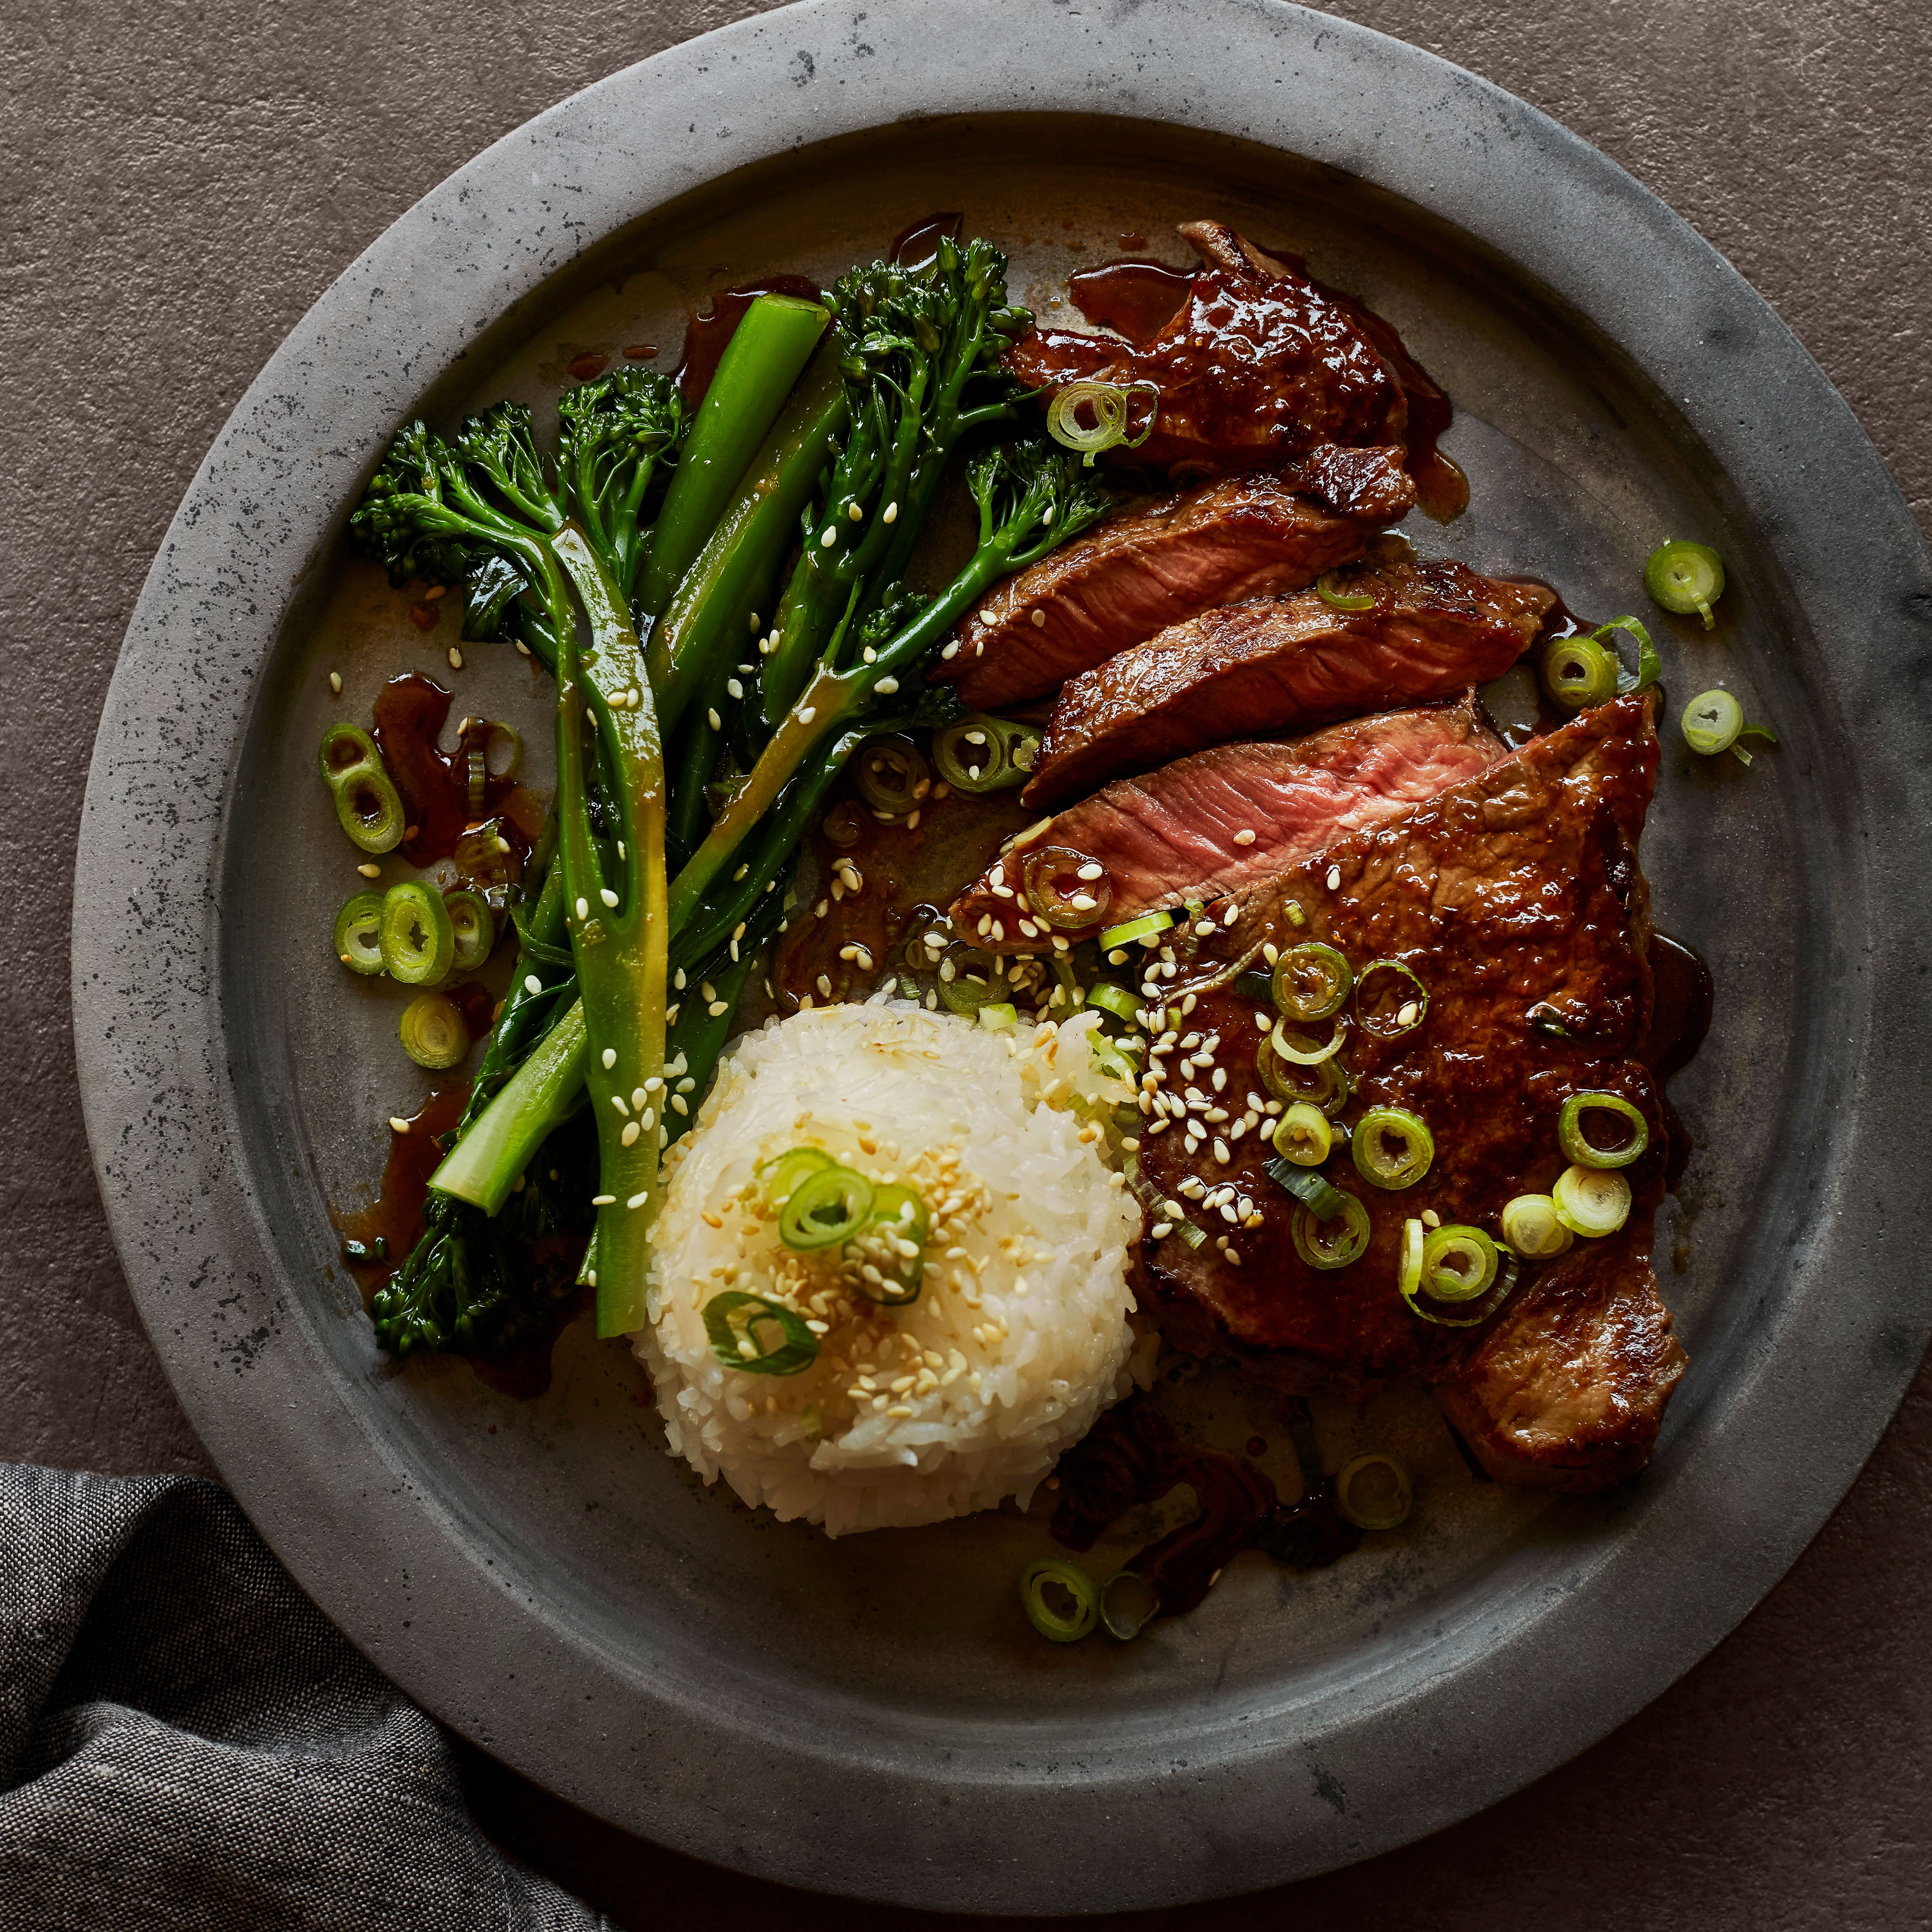 Soy-ginger beef steaks with broccoli